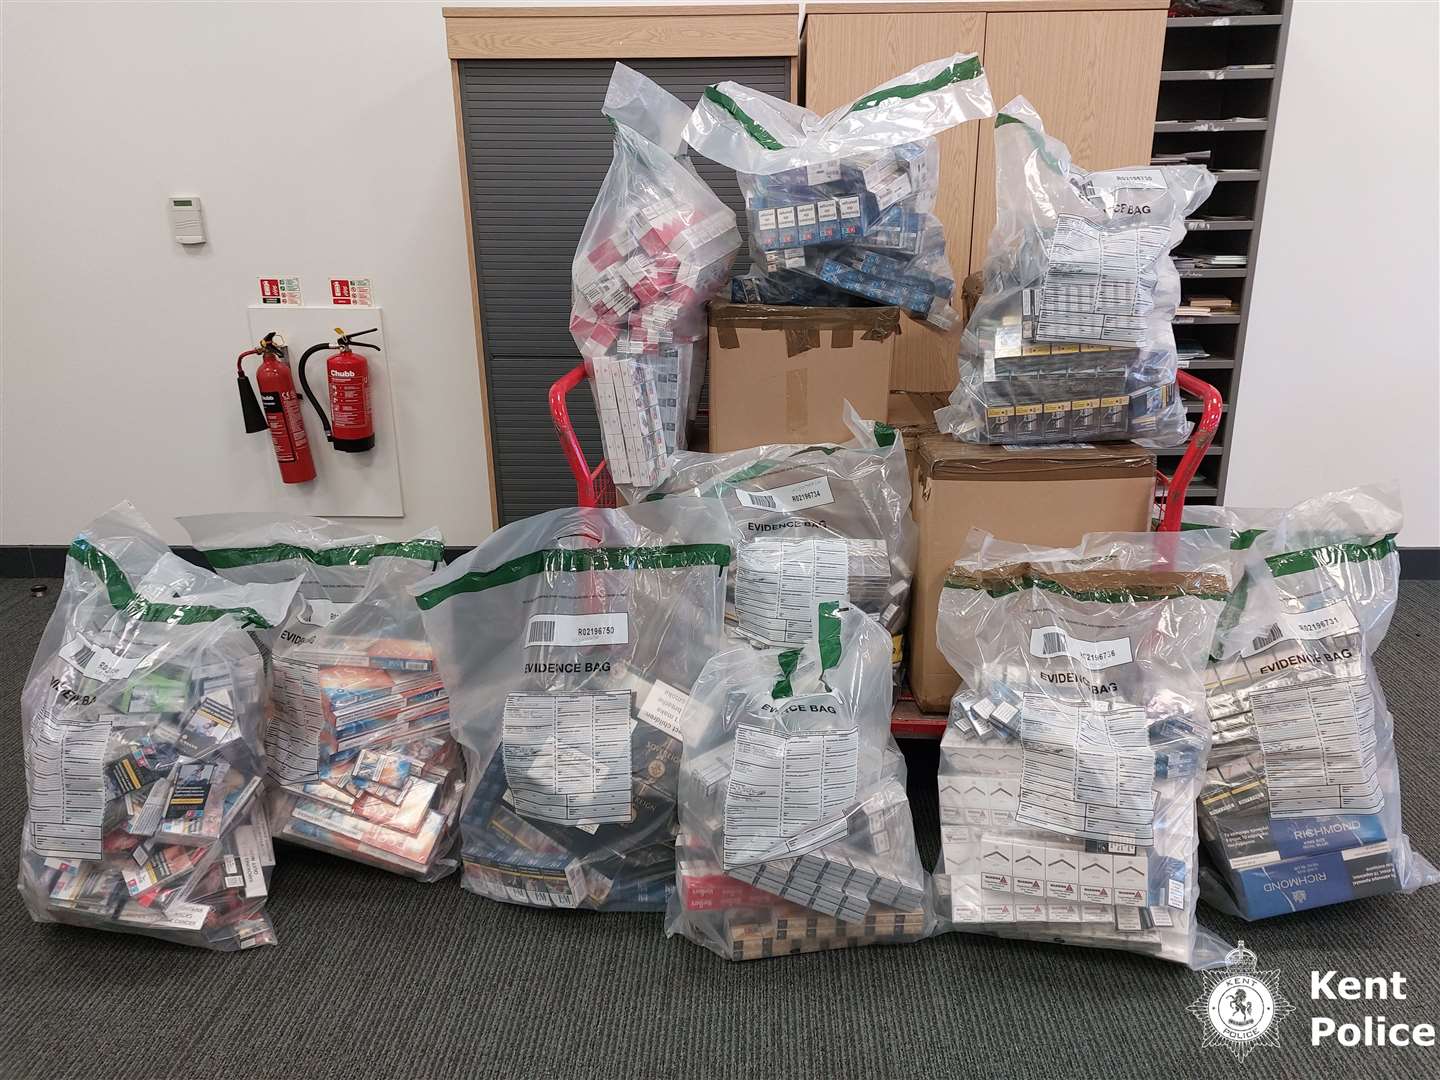 More than 120,000 illegal cigarettes were seized. Picture: Kent Police